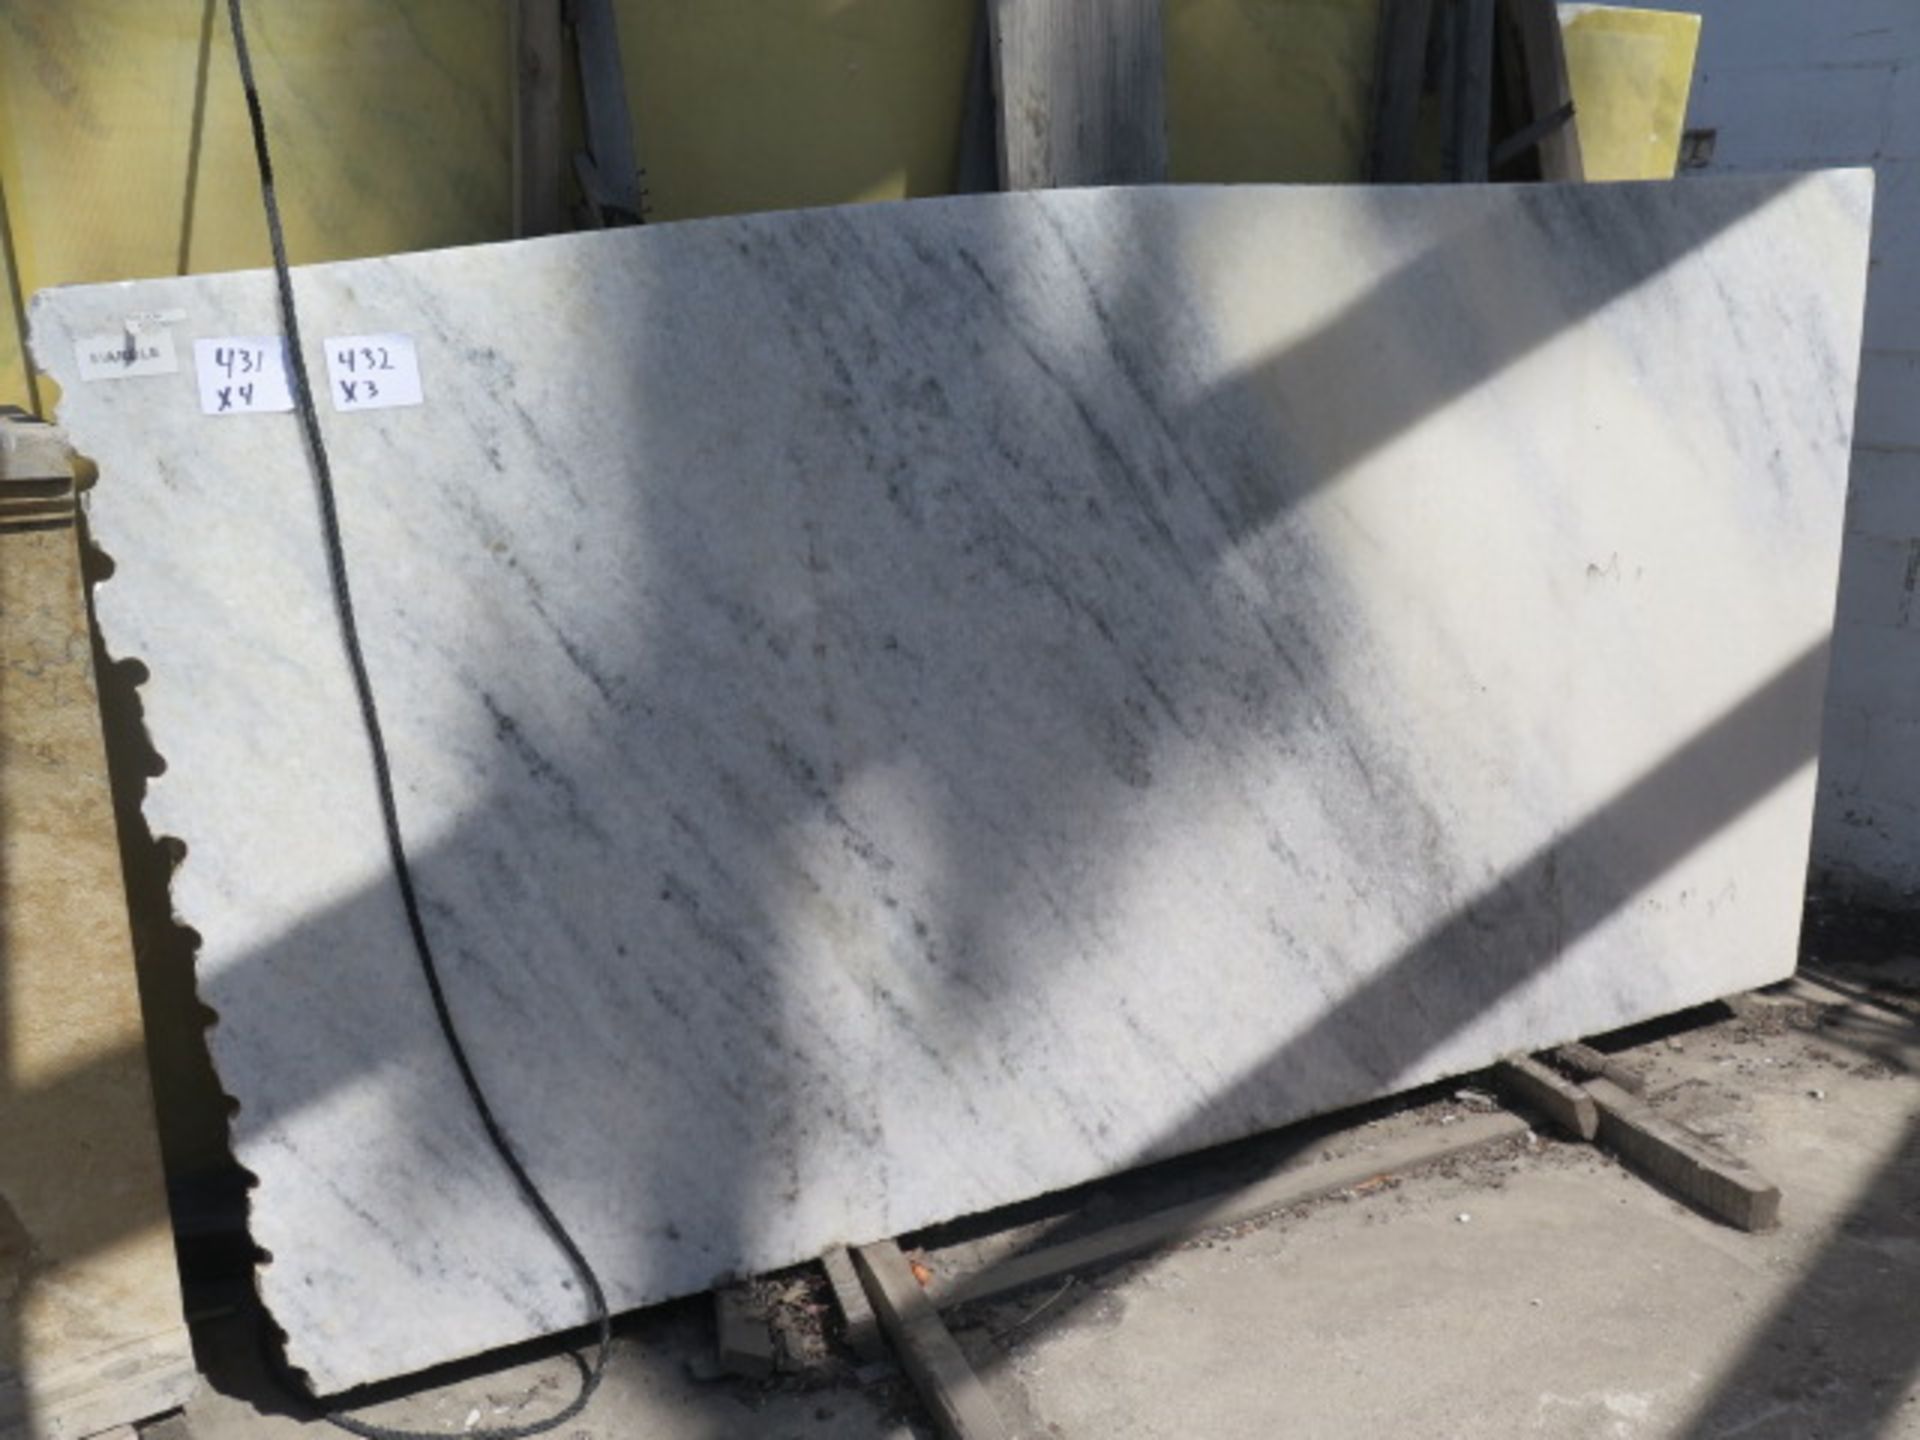 Crystal Ice Marble (3 Slabs) (SOLD AS-IS - NO WARRANTY)